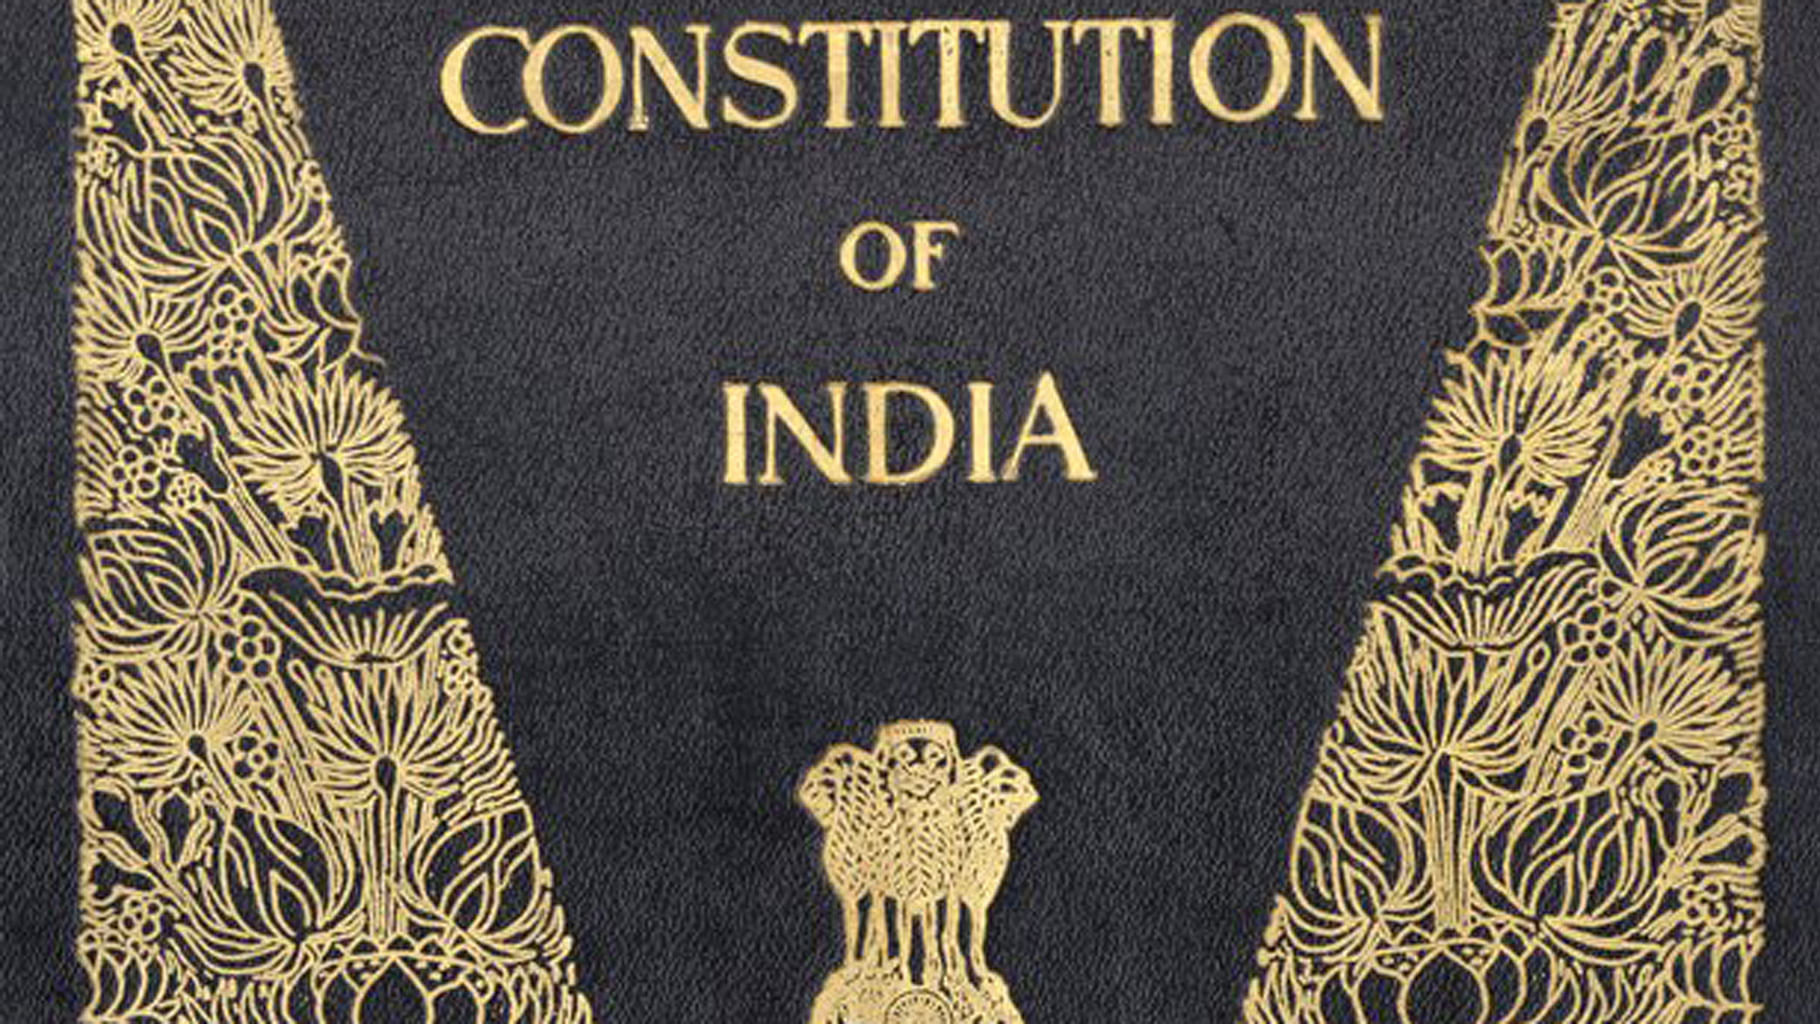 A copy of the Constitution of India. (Photo Courtesy: <a href="http://www.simplydecoded.com/indian-constitution/">Simply Decoded</a>)